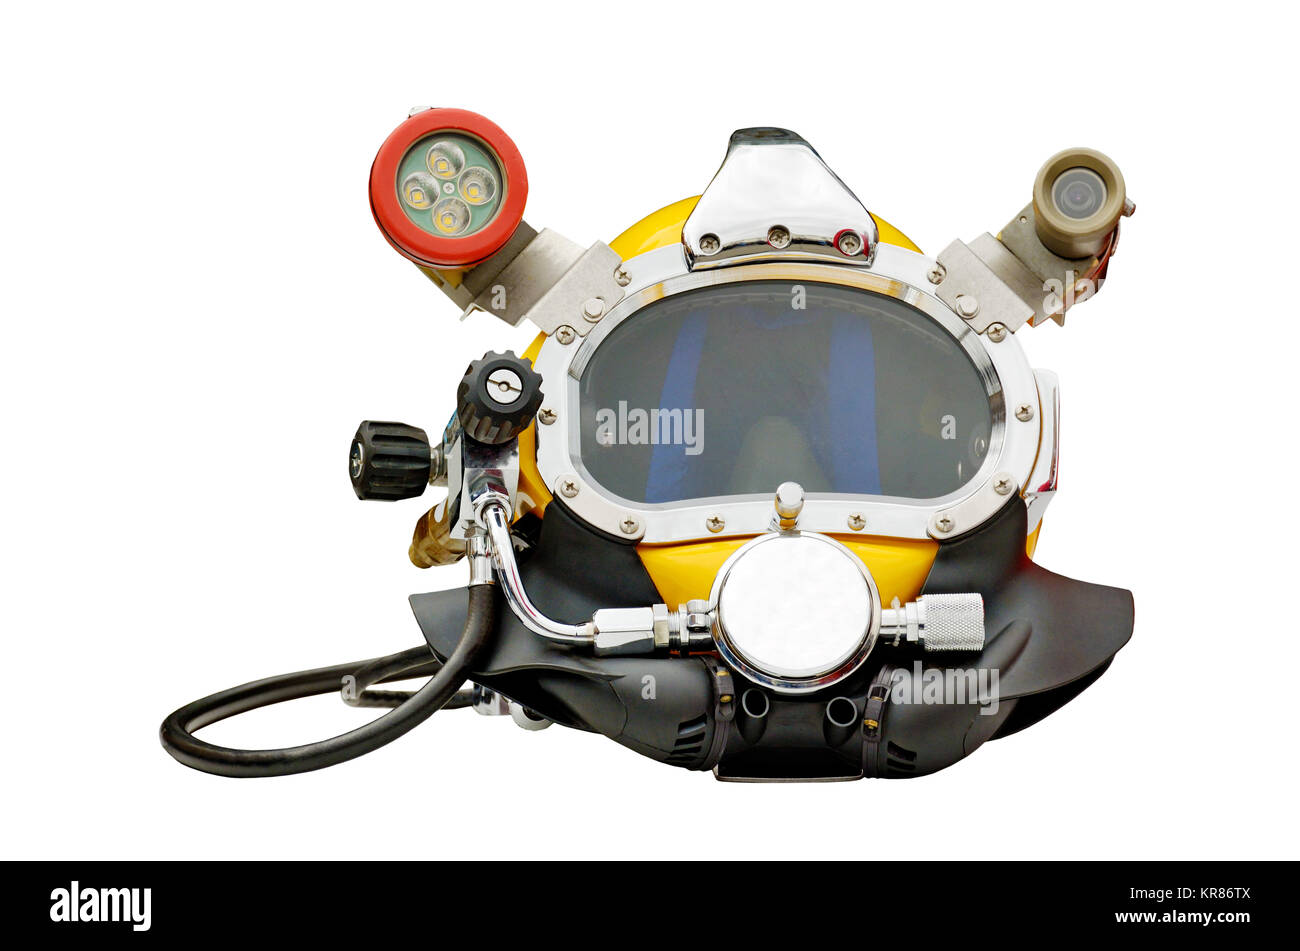 Headgear for diving.Protects the person's head under water. Stock Photo